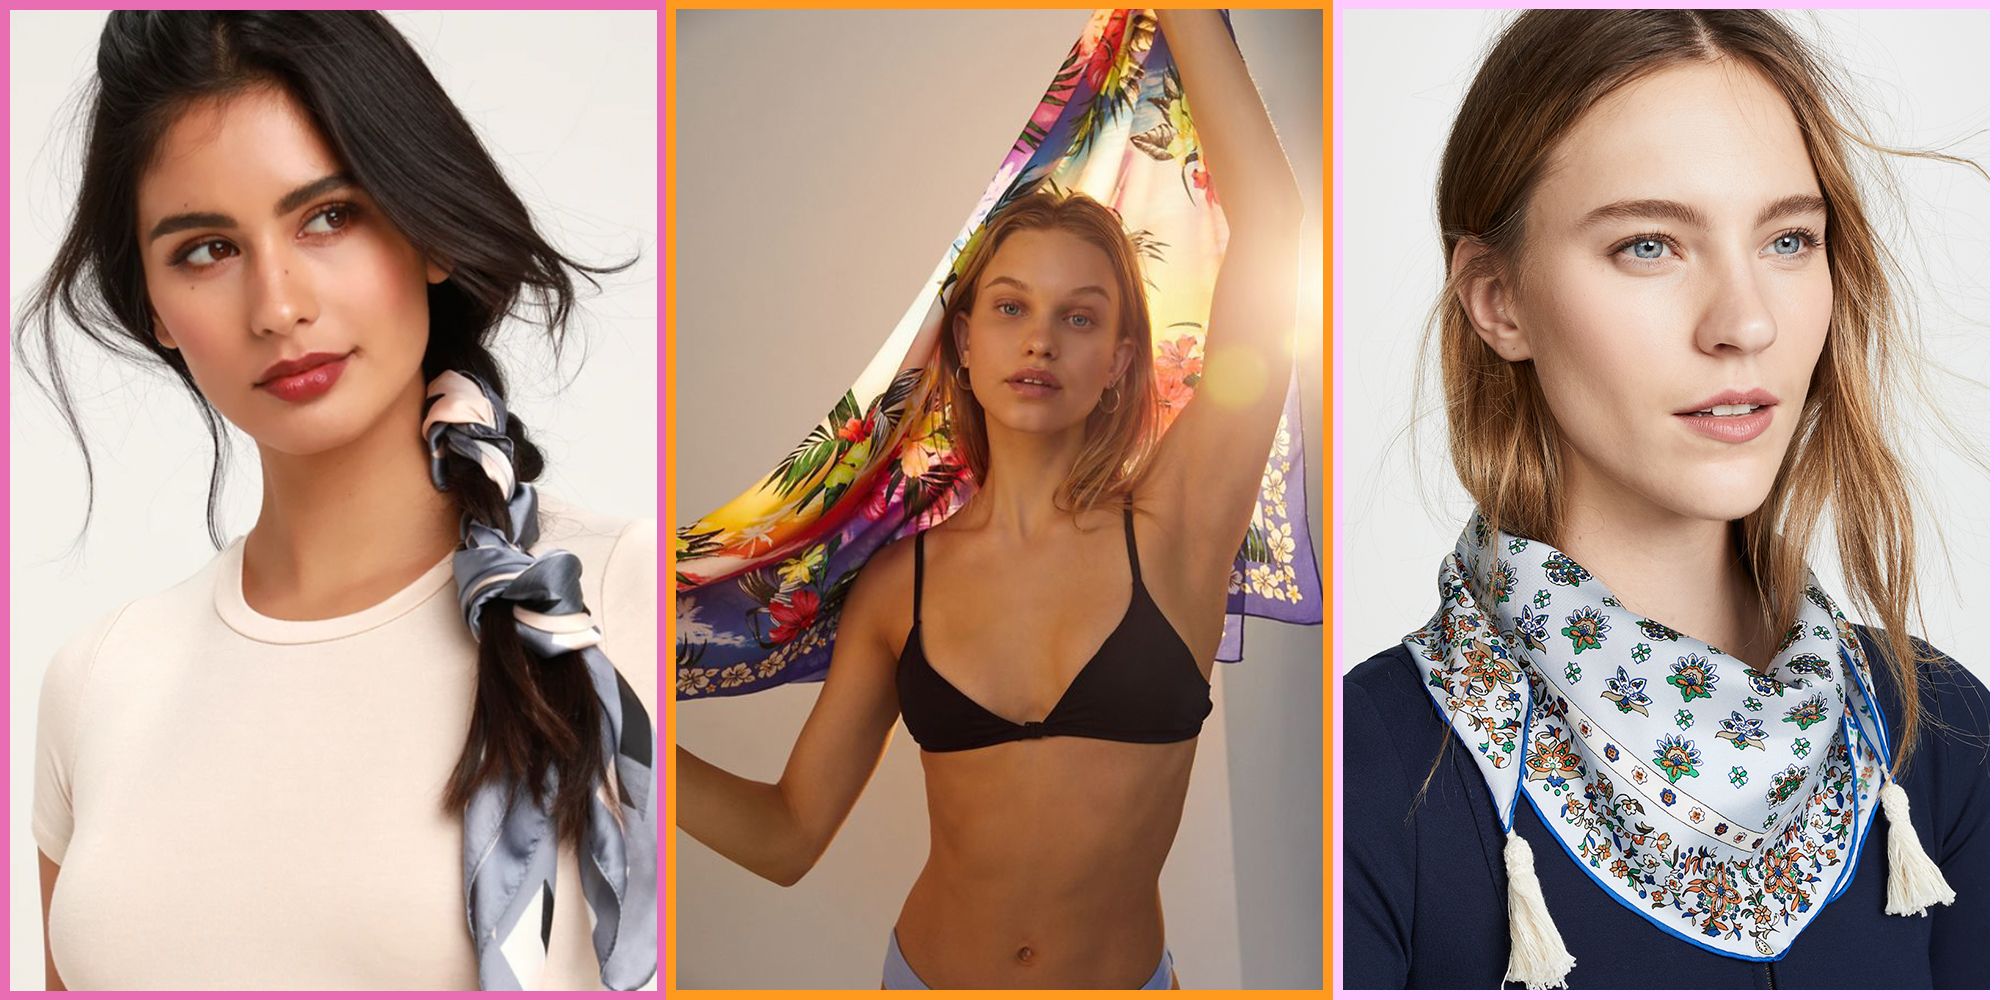 How To Style A Scarf This Summer - FASHION Magazine